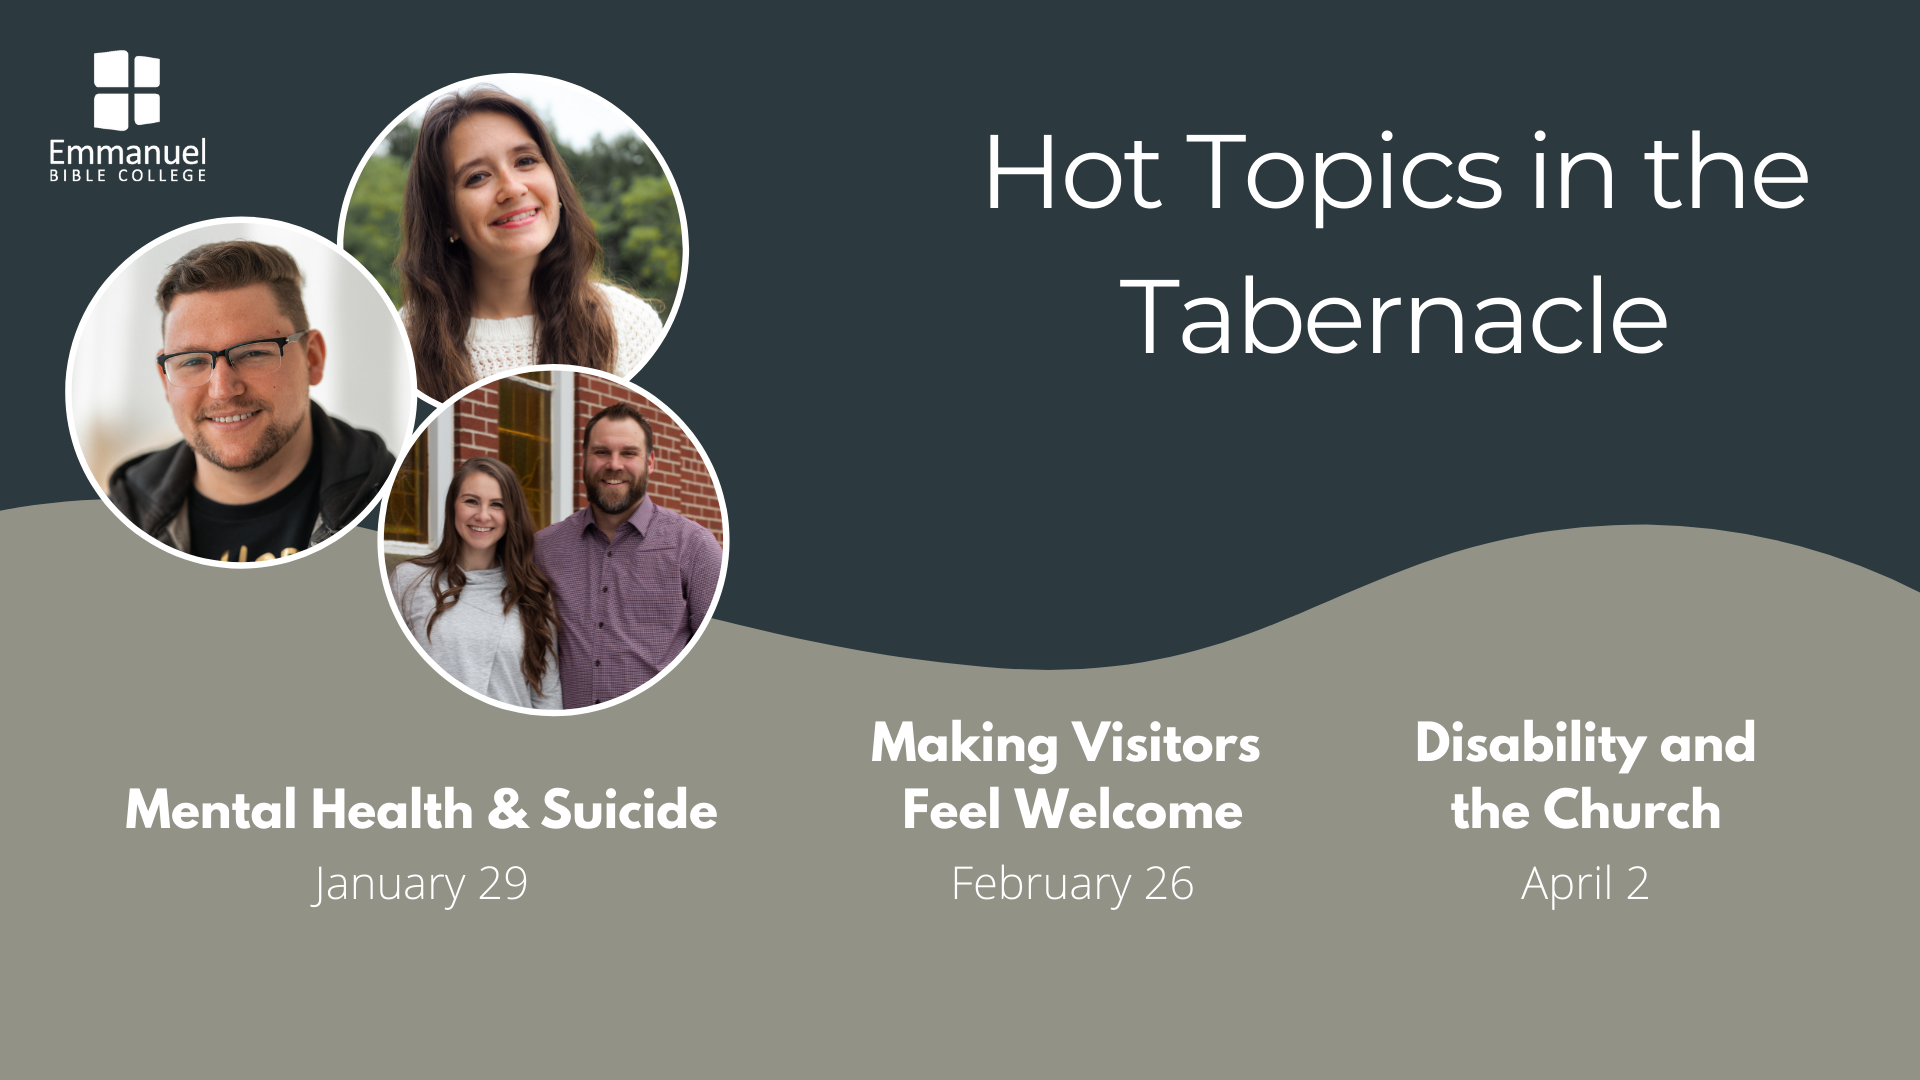 Hot Topics in the Tabernacle, Mental Health & Suicide, January 29th, Making Visitors Feel Welcome, January 26th, Disability and the Church, April 2nd